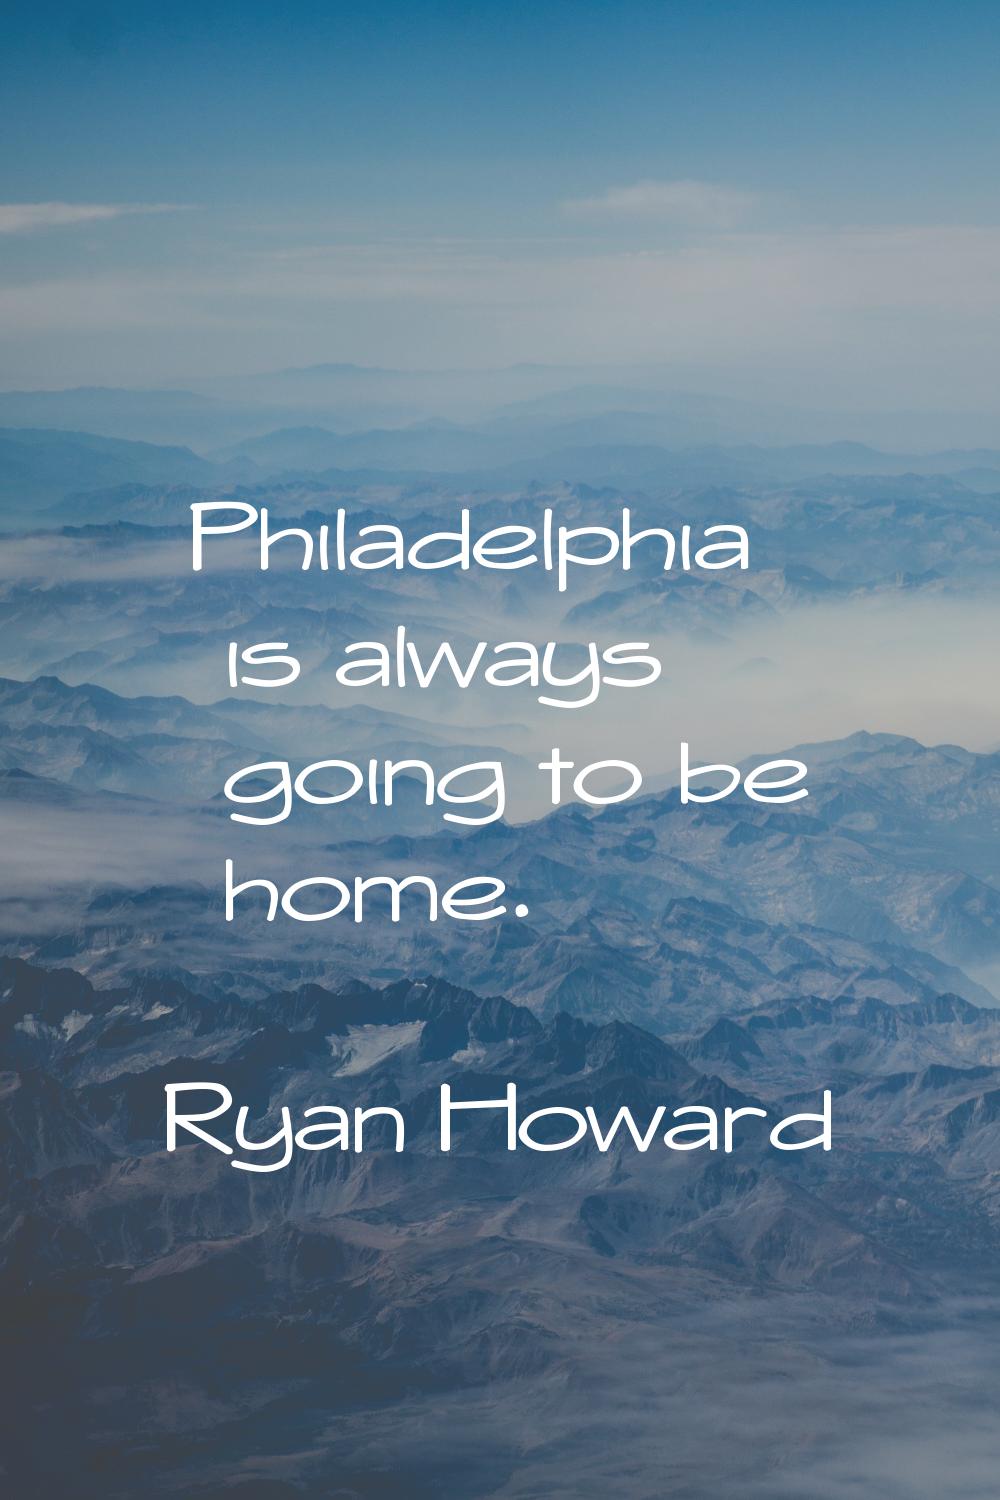 Philadelphia is always going to be home.